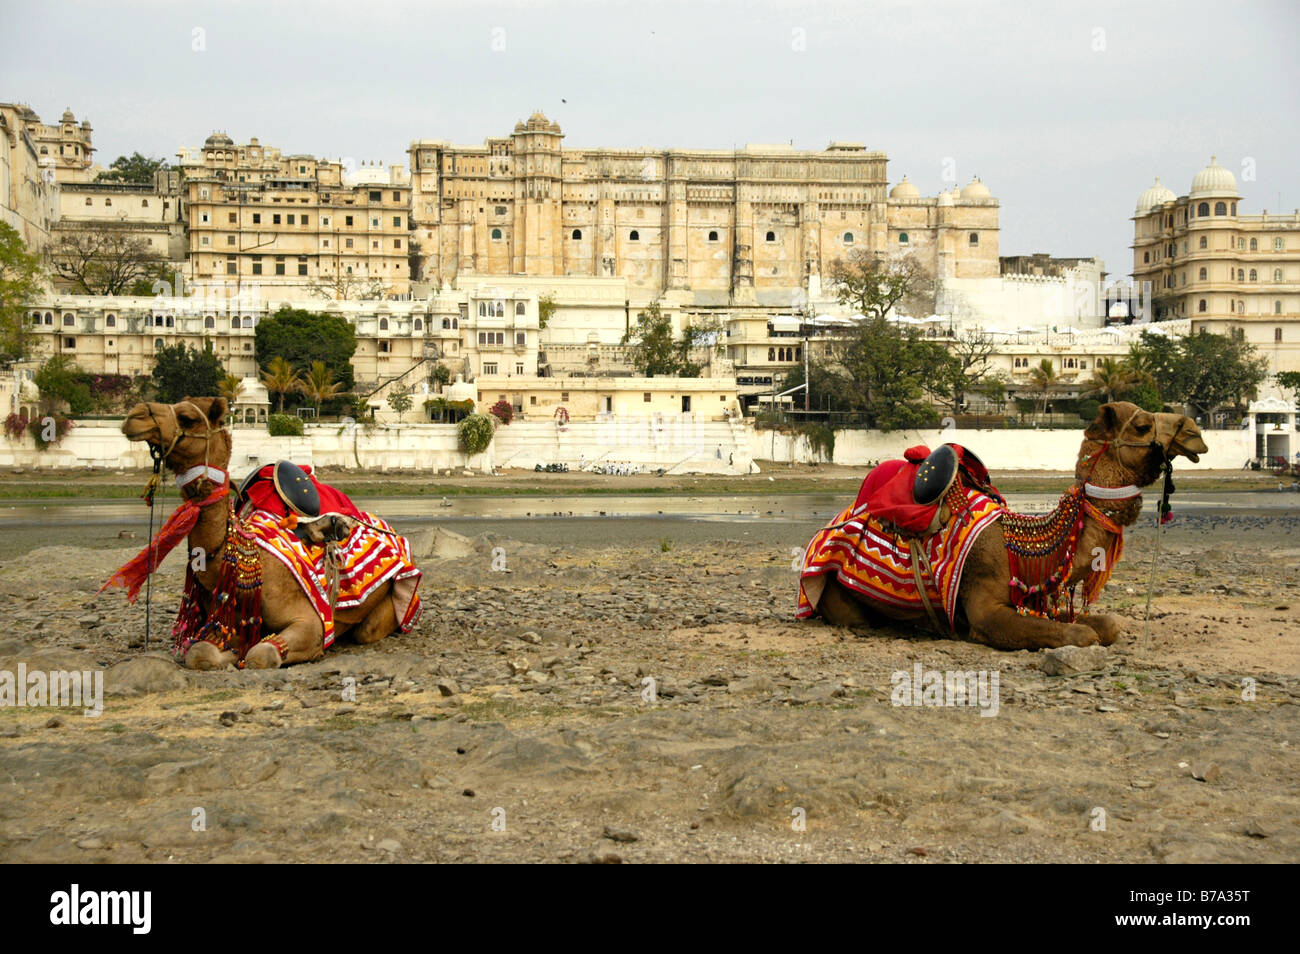 Camels with colourful saddles lying in the dryed-out Pichola Lake in front of the city palace, Maharaja Palace, Udaipur, Rajast Stock Photo